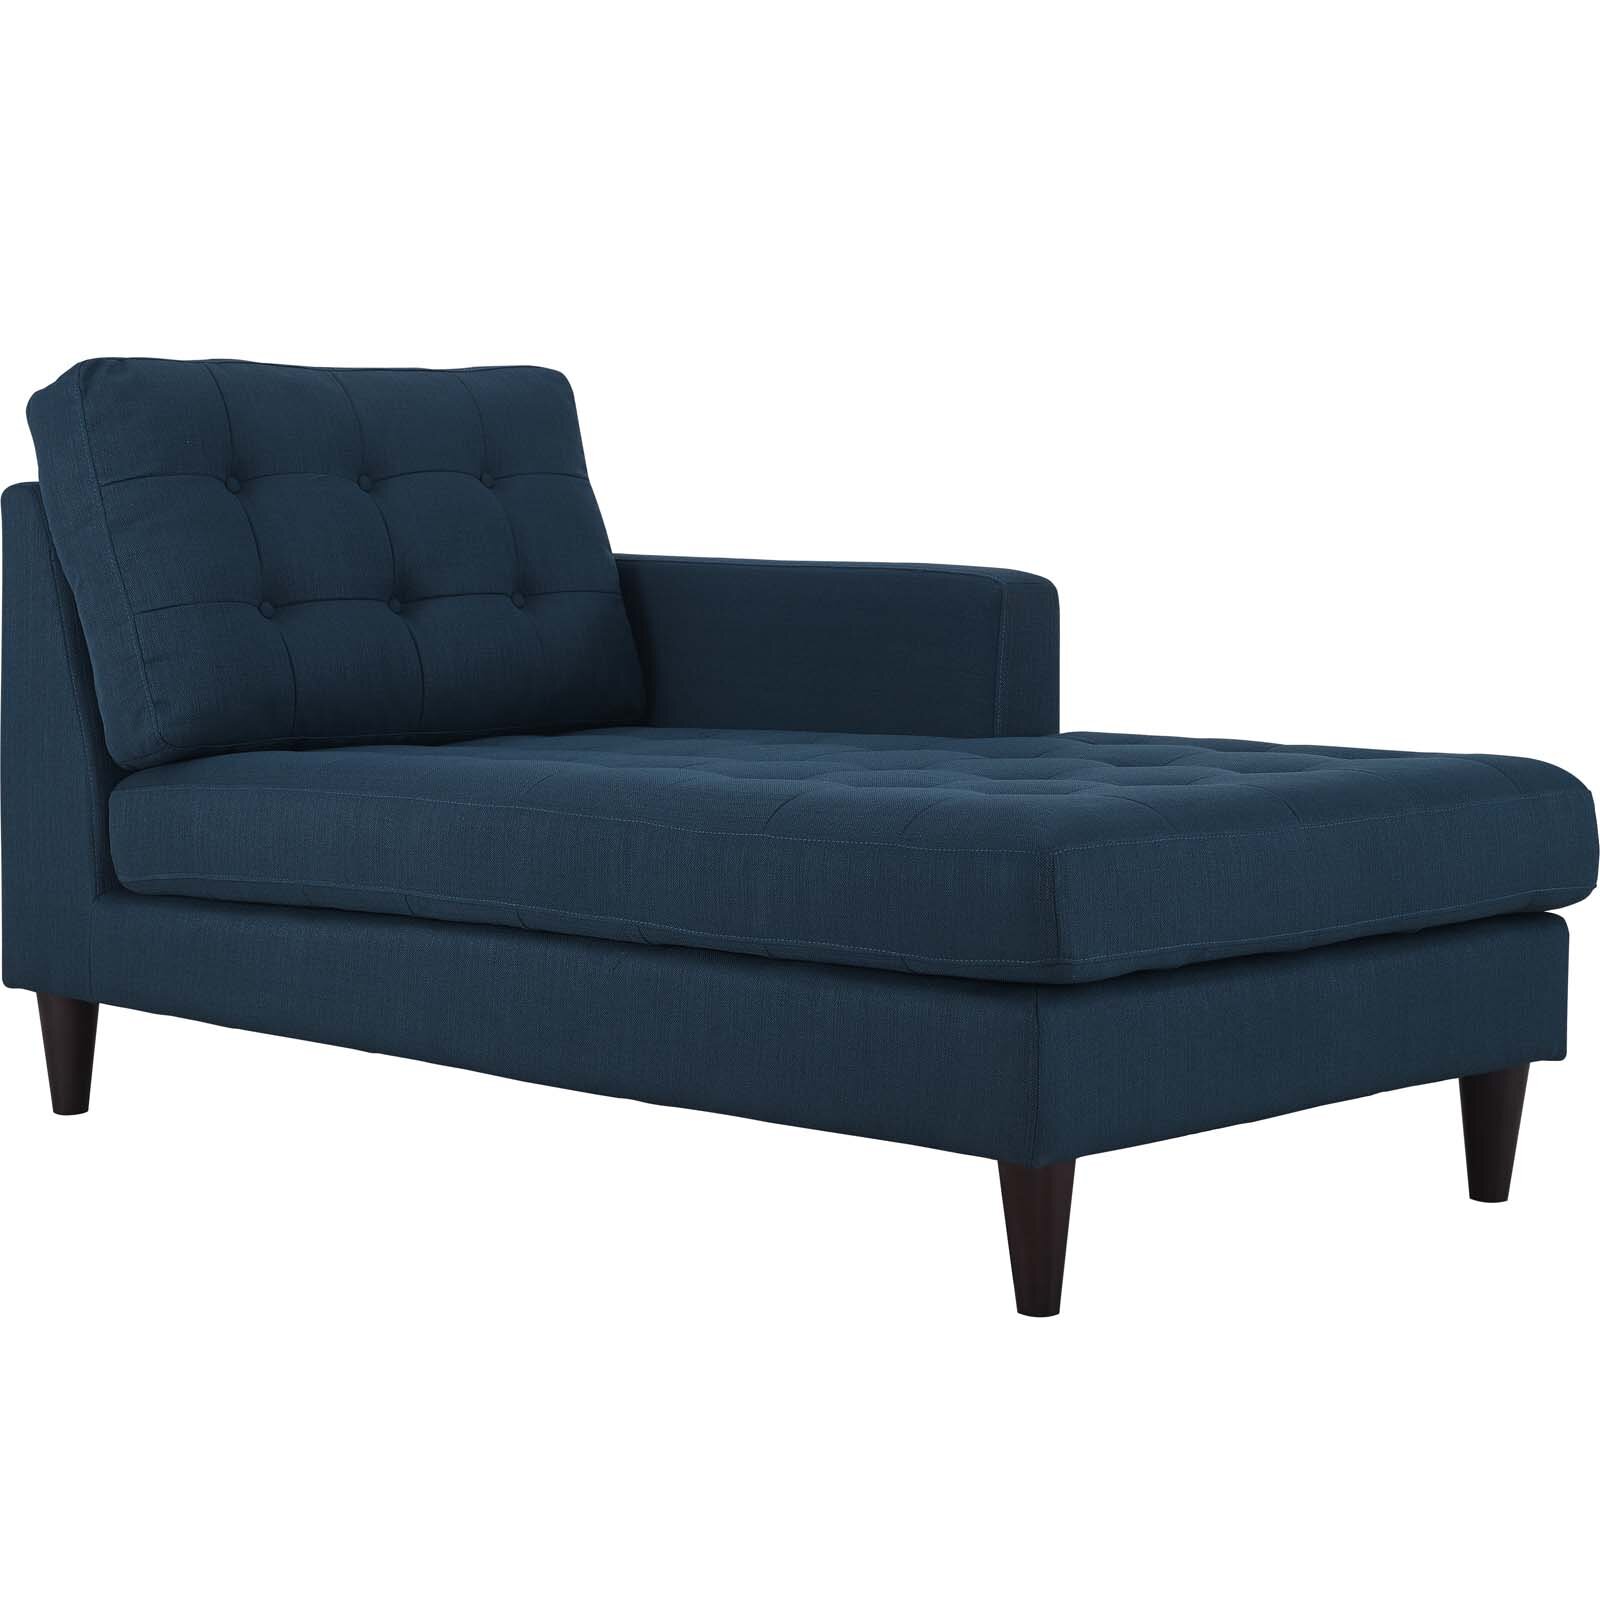 Stafford Chaise Lounge